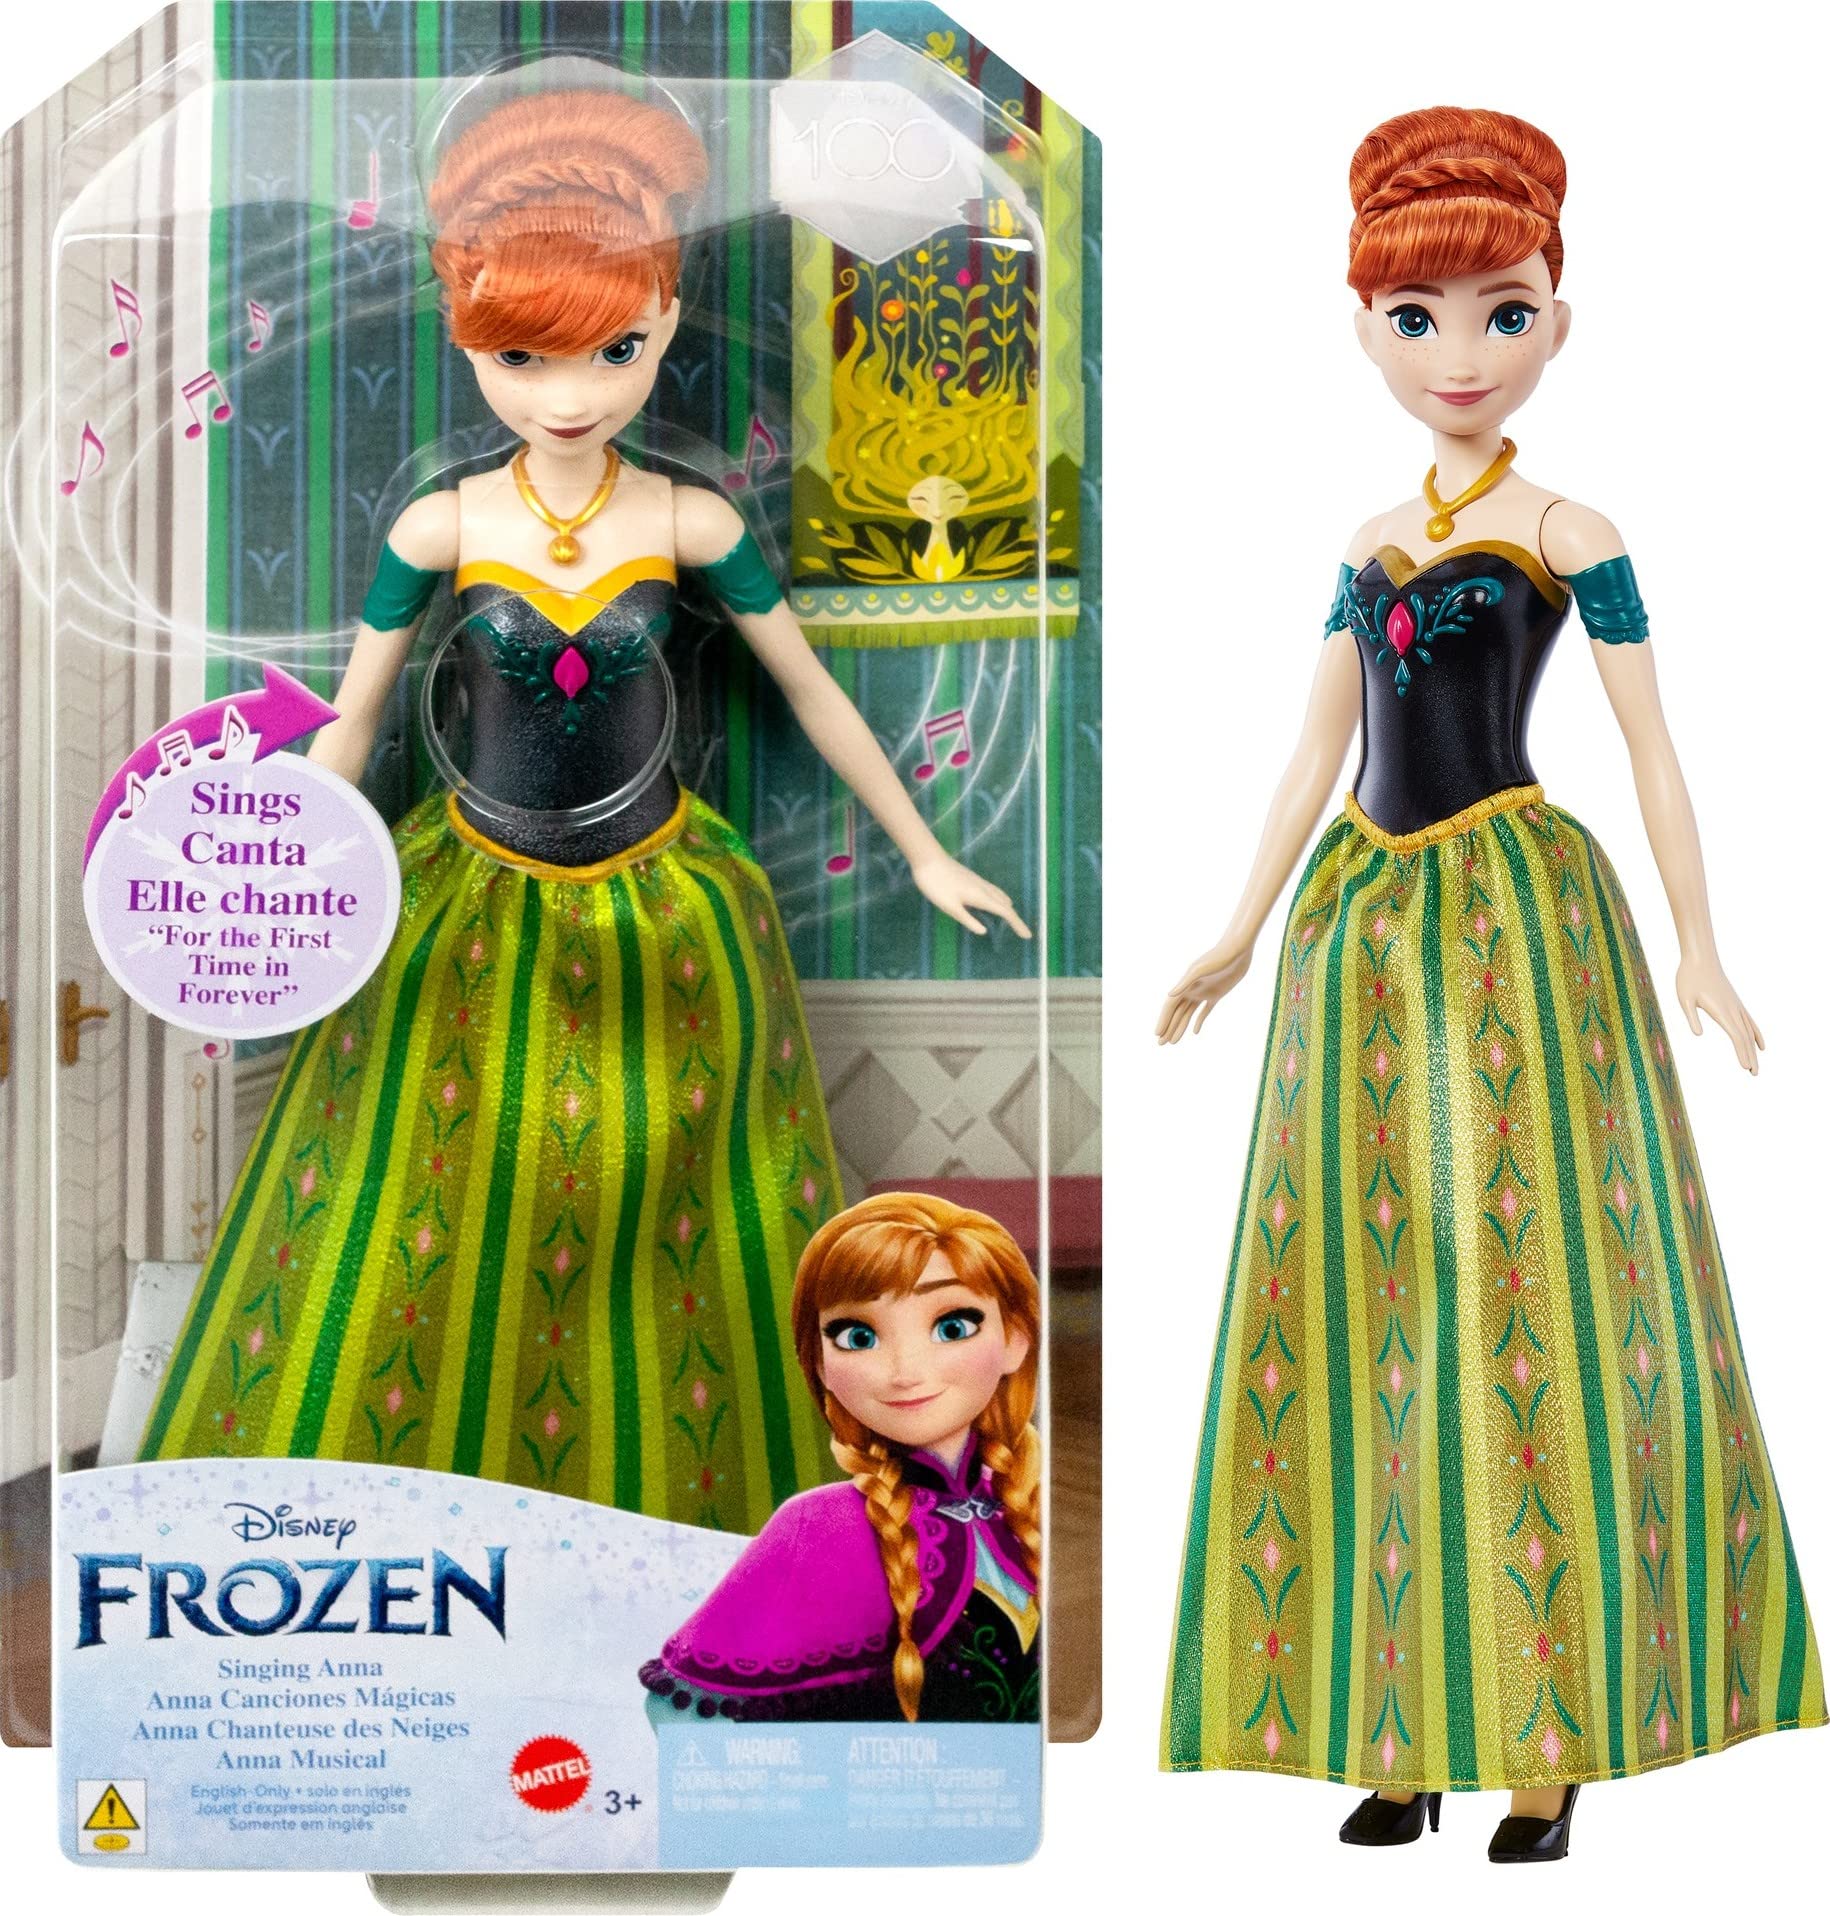 Disney Frozen Toys, Singing Anna Doll in Signature Clothing, Sings “For the First Time in Forever” from the Disney Movie Frozen